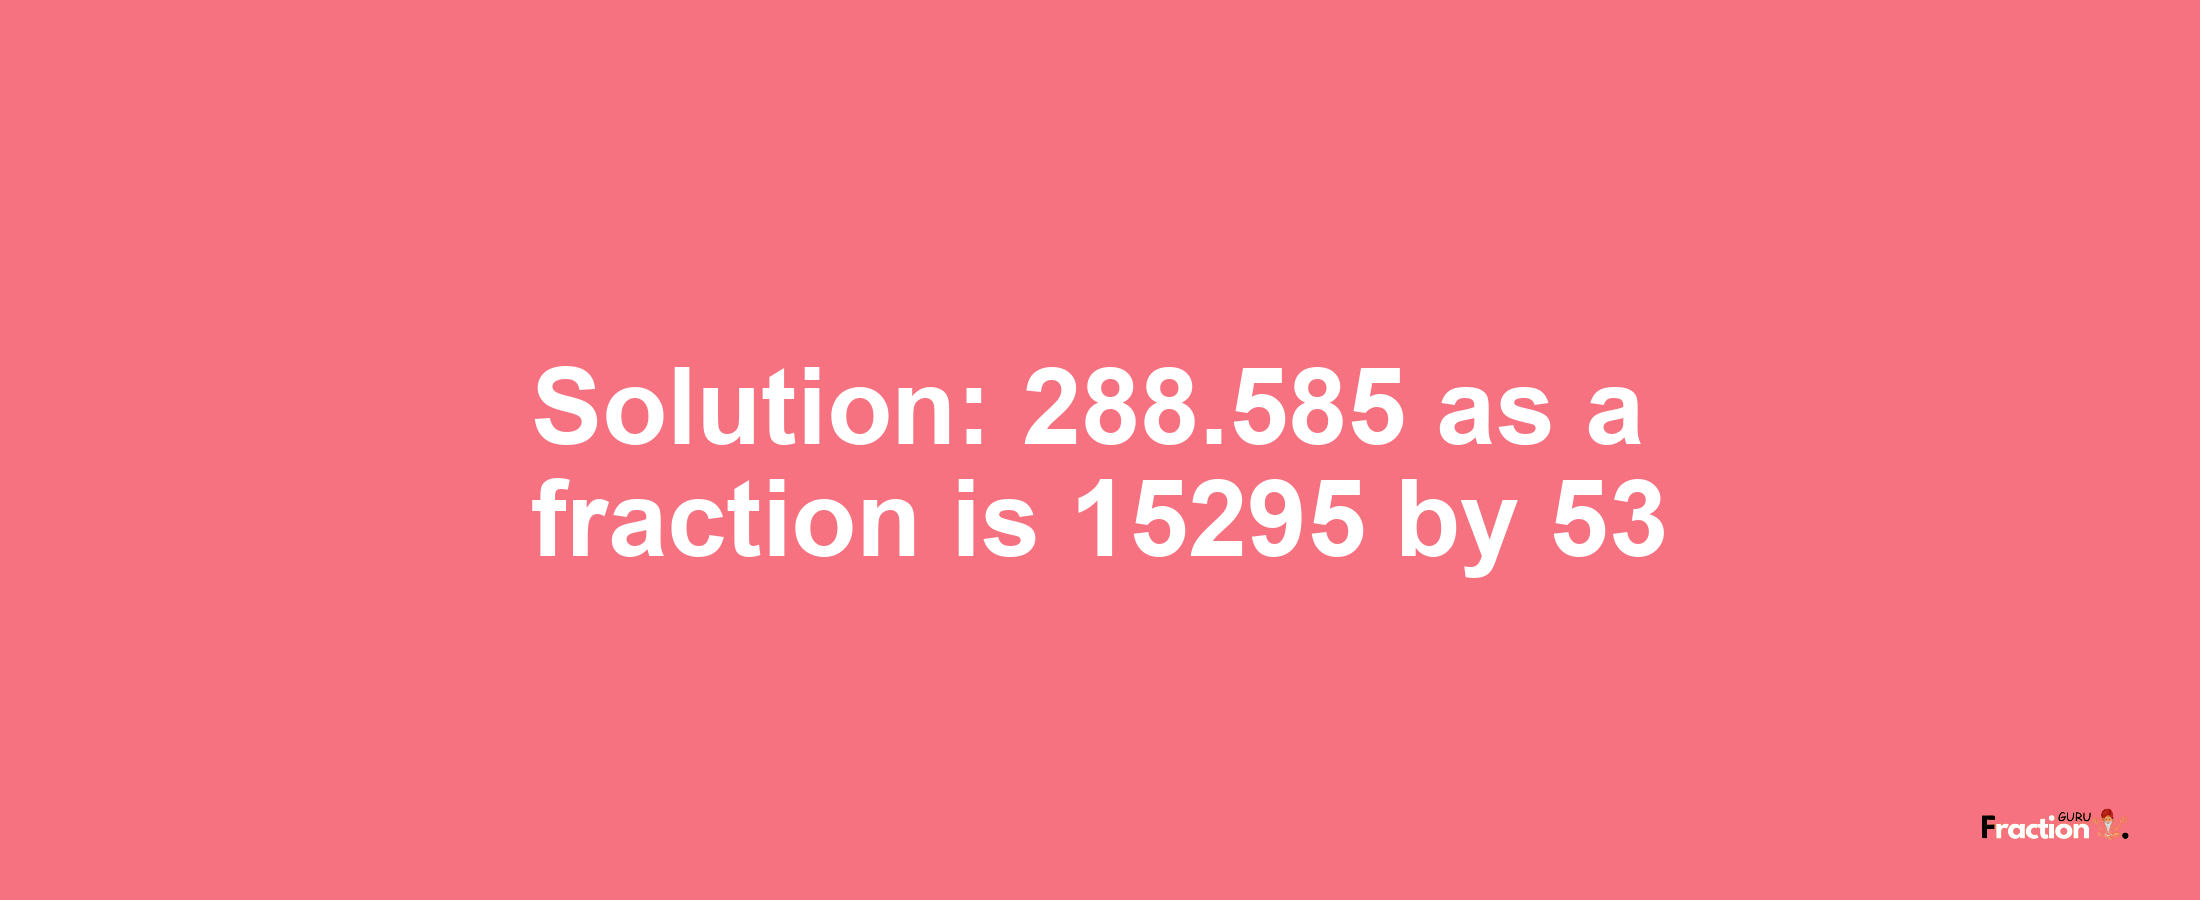 Solution:288.585 as a fraction is 15295/53